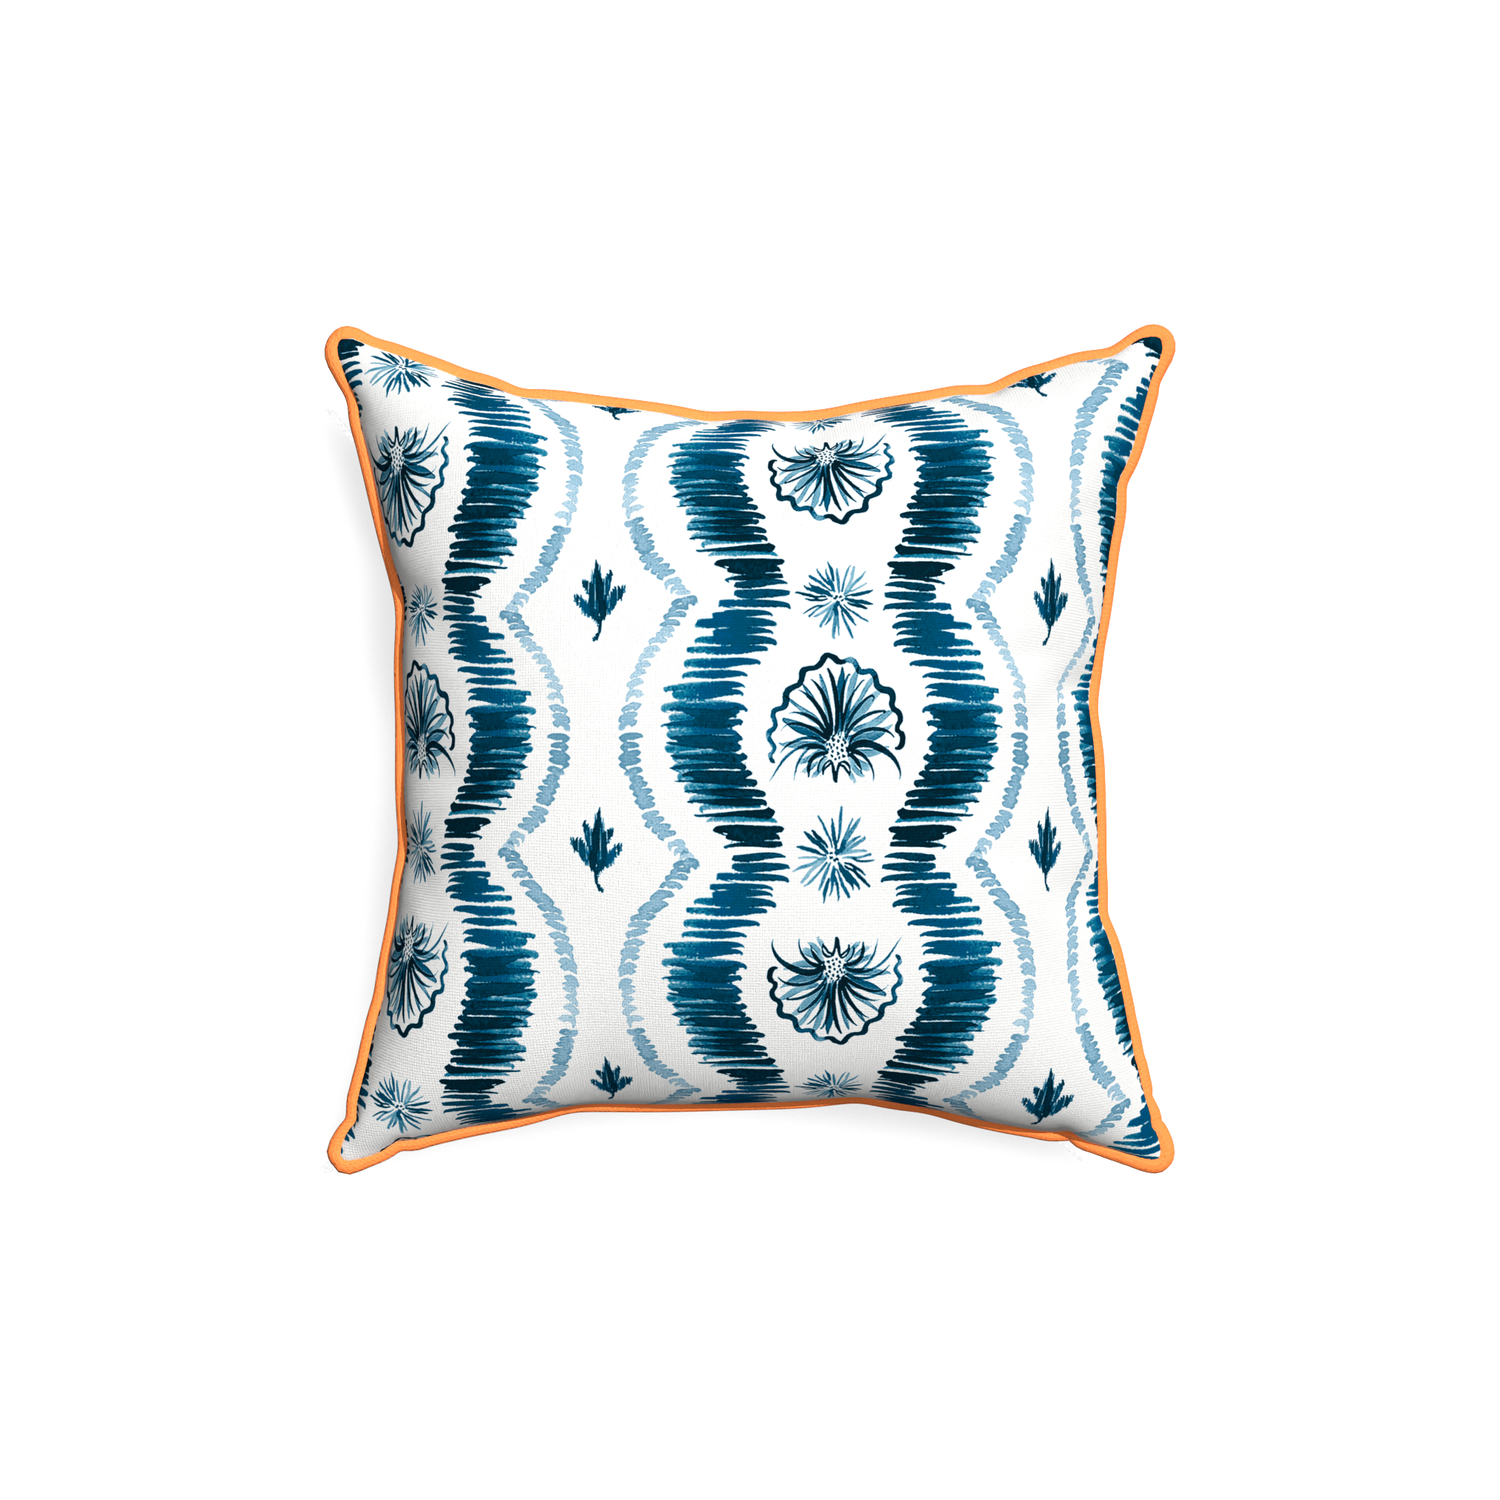 18-square alice custom blue ikatpillow with clementine piping on white background